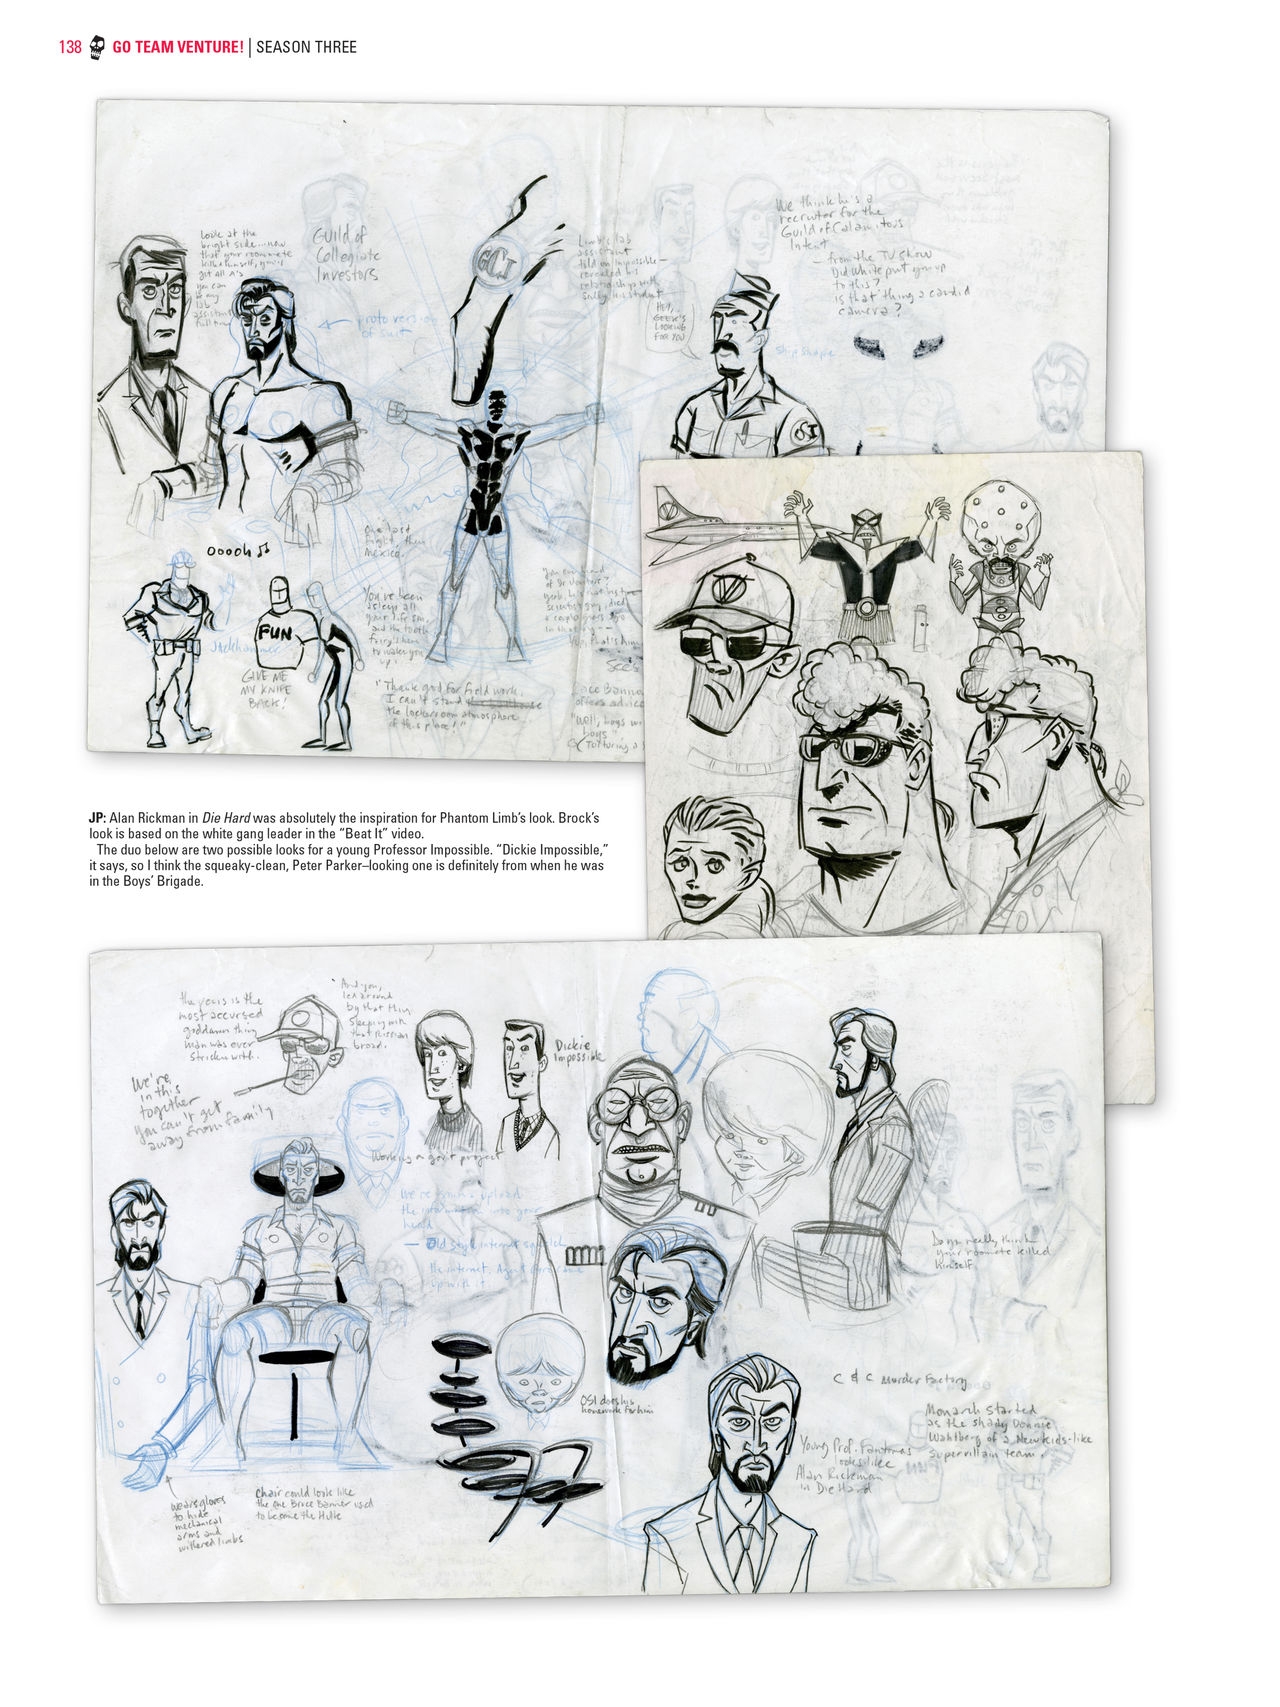 Go Team Venture! - The Art and Making of the Venture Bros 136